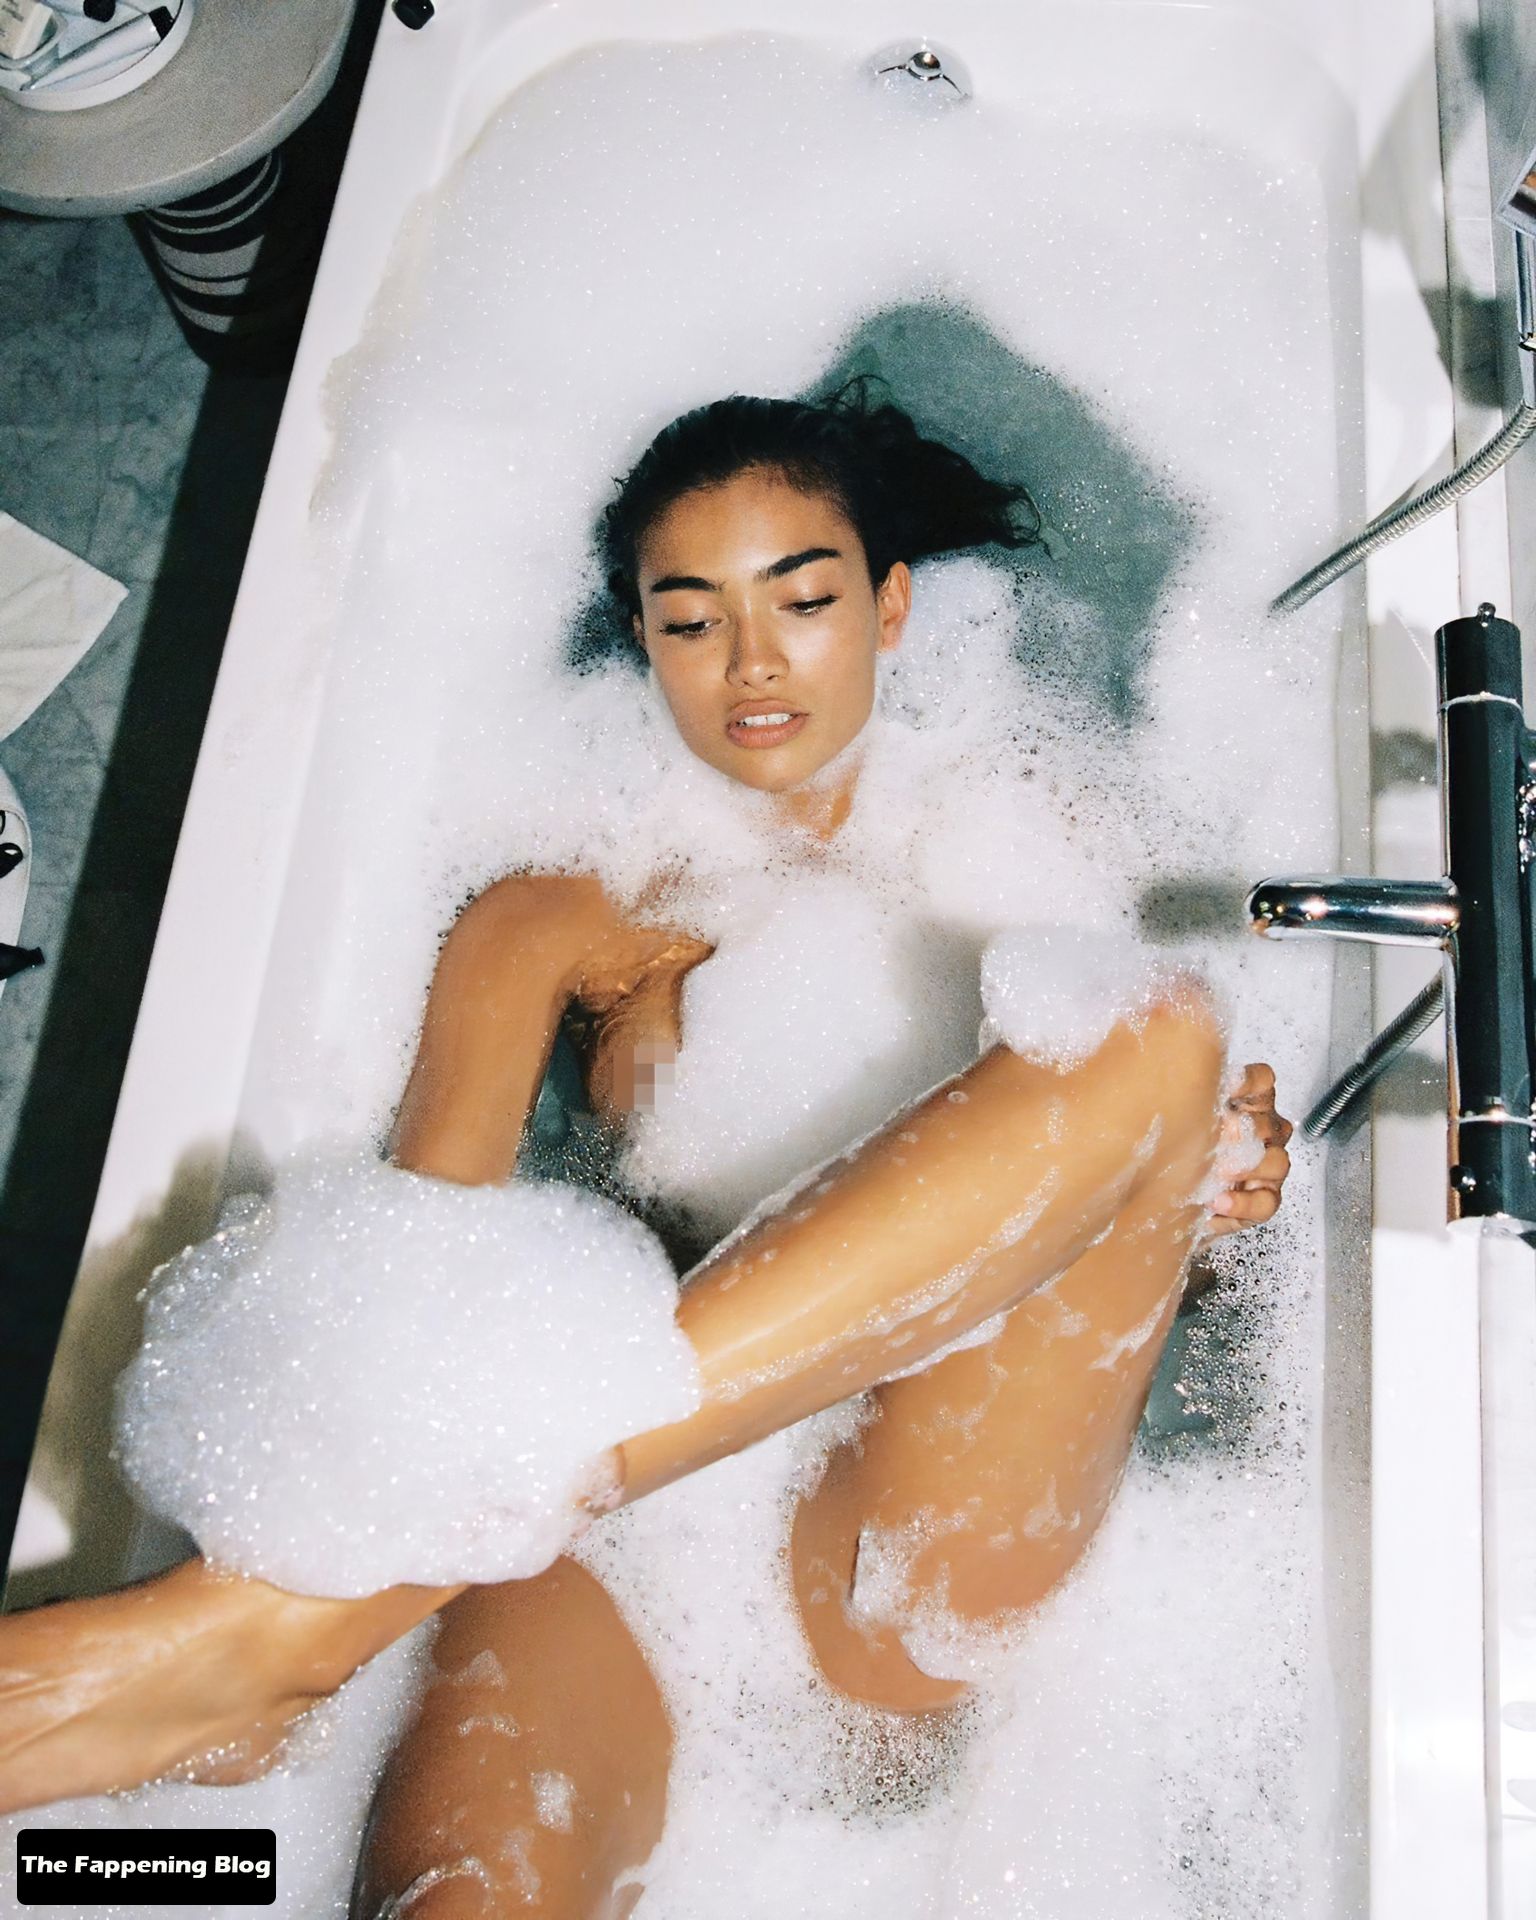 Kelly-Gale-Topless-5-1-1-thefappeningblog.com_.jpg